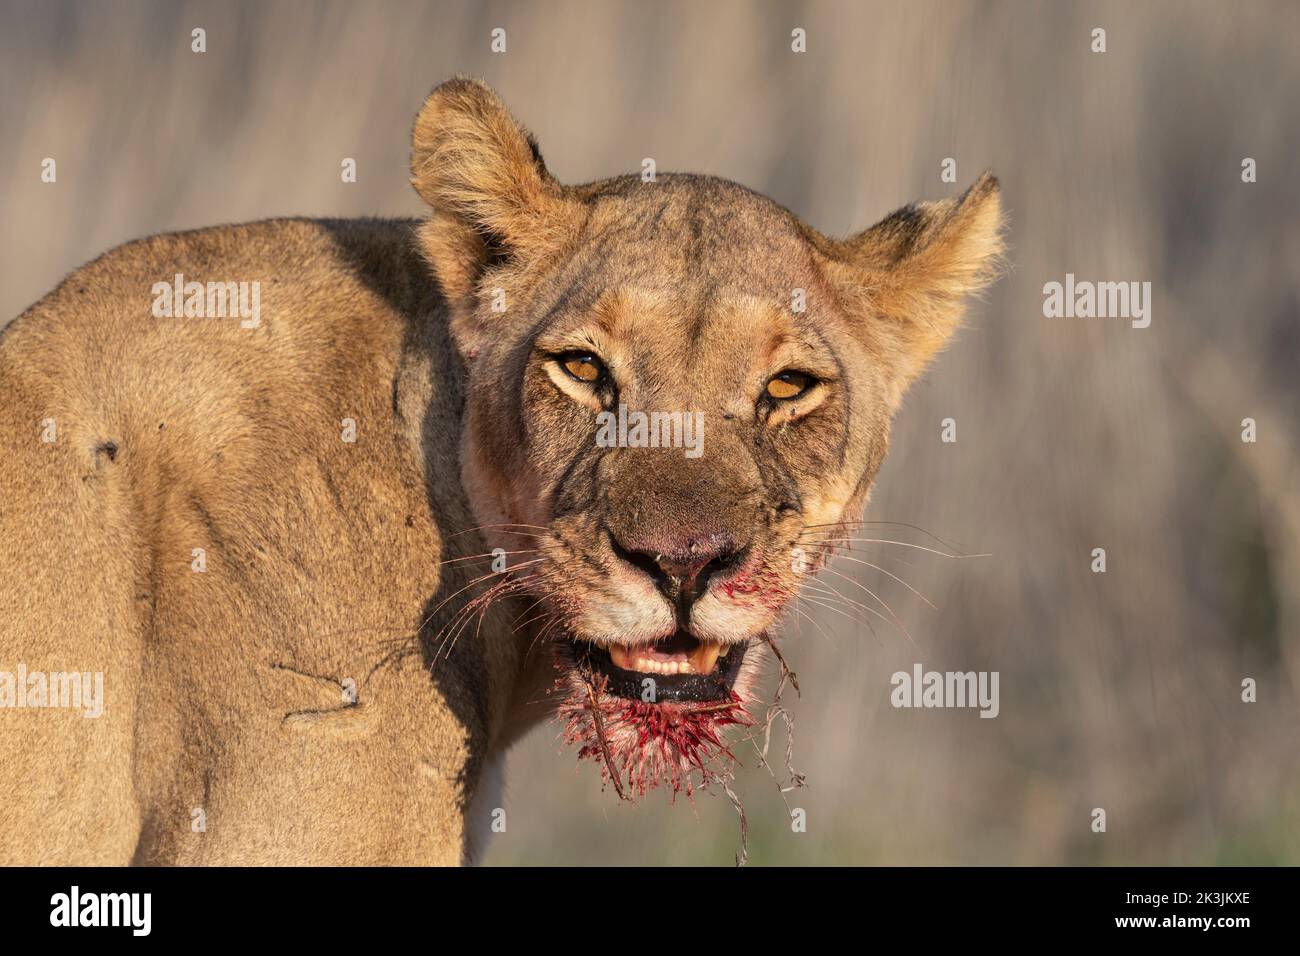 Lioness (Panthera leo) with bloodied muzzle, Kgalagadi transfrontier park, Northern Cape, South Africa Stock Photo